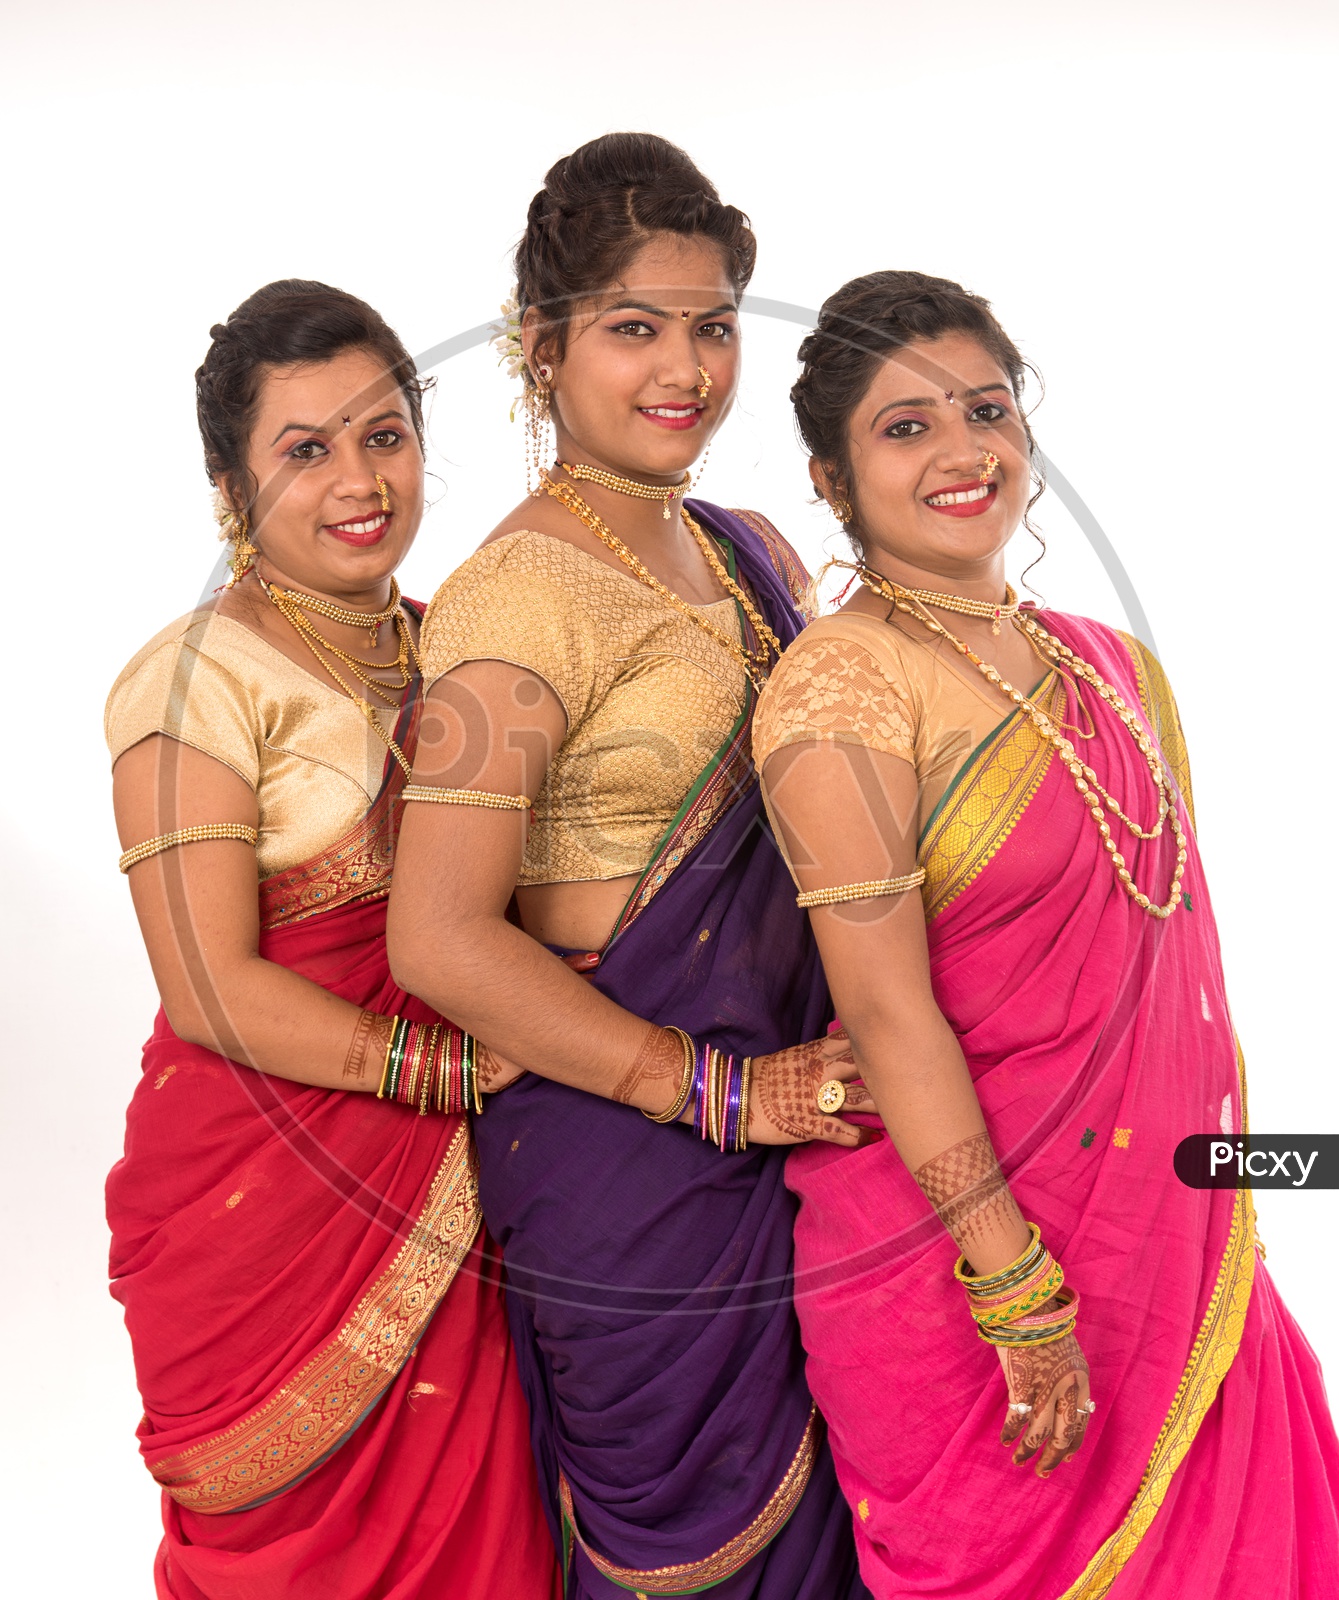 Portrait Of a Young Traditional Marathi Woman or Sisters Wearing an Elegant Sari And Posing With Smile Face And With Expression  On an Isolated White Background